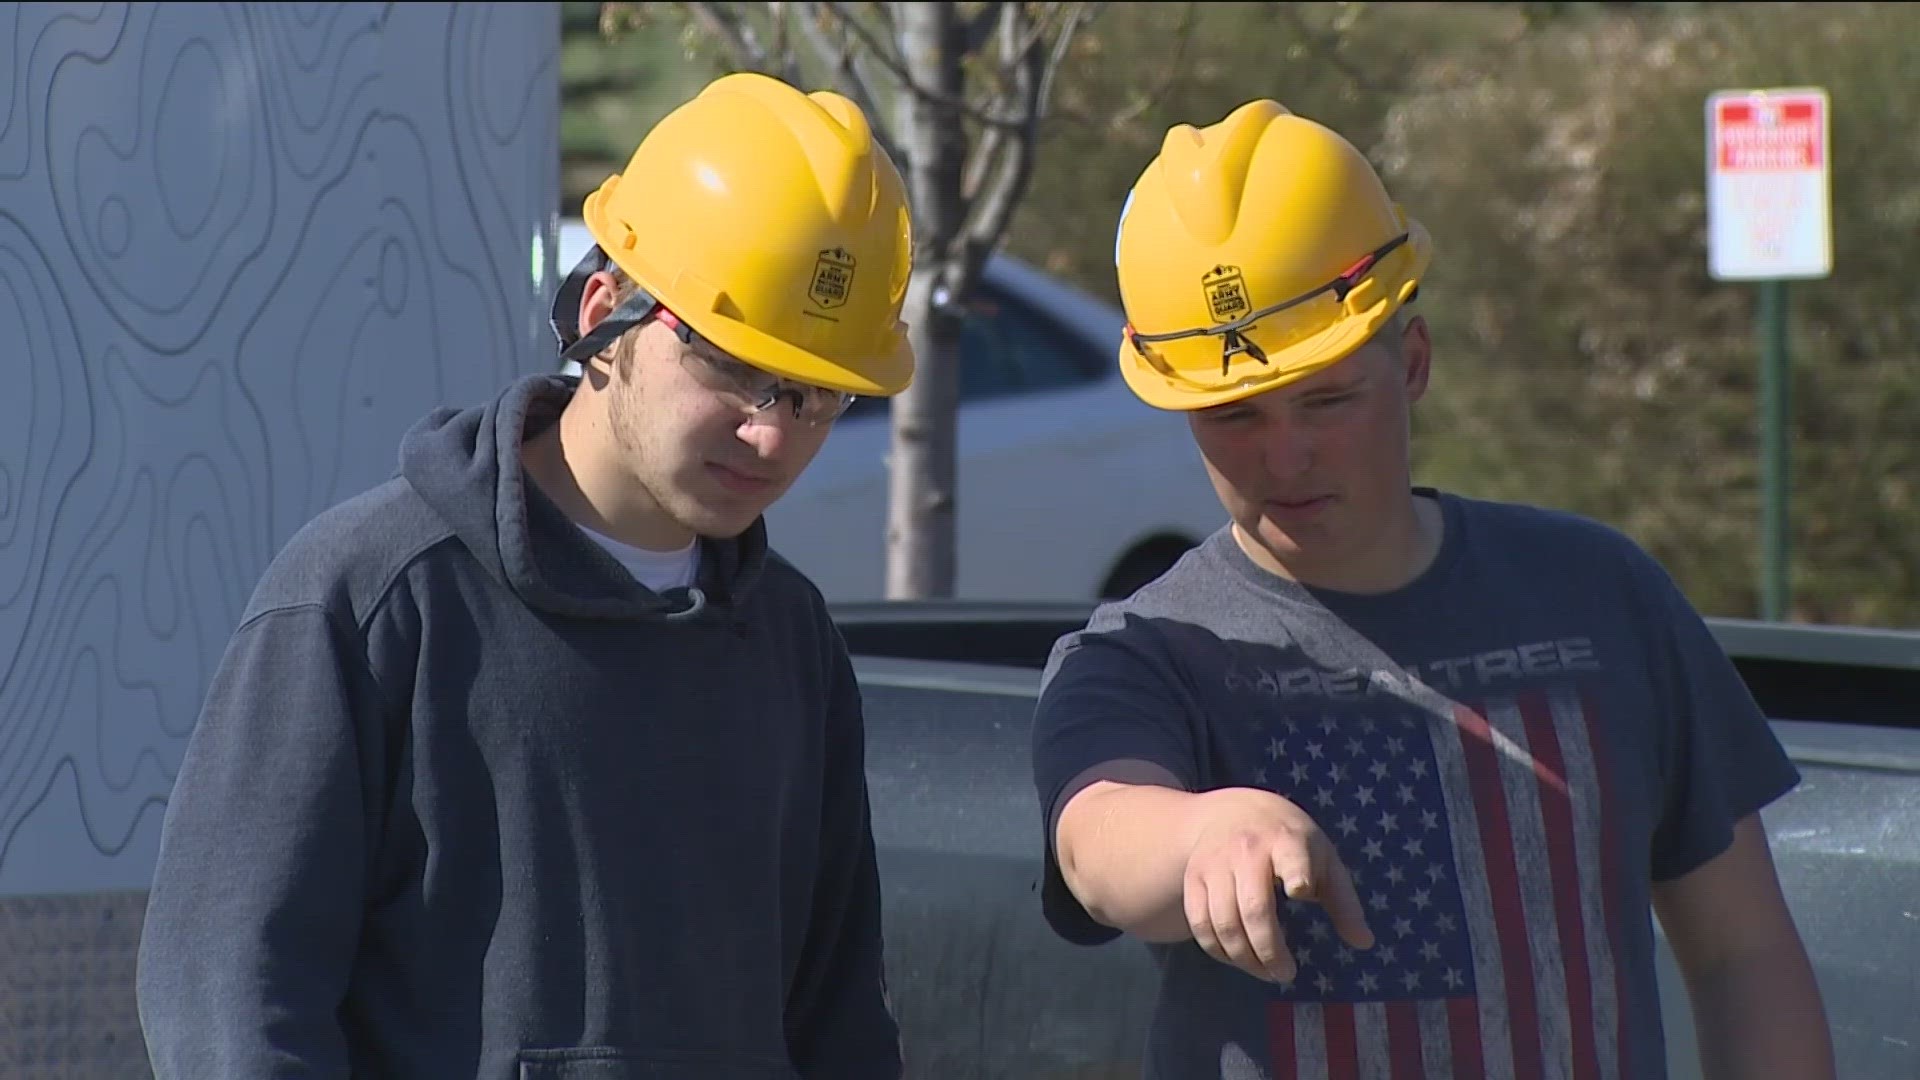 The Construction Combine at the Home Depot in Meridian helps high school students learn skills in different industries while working with potential employers.